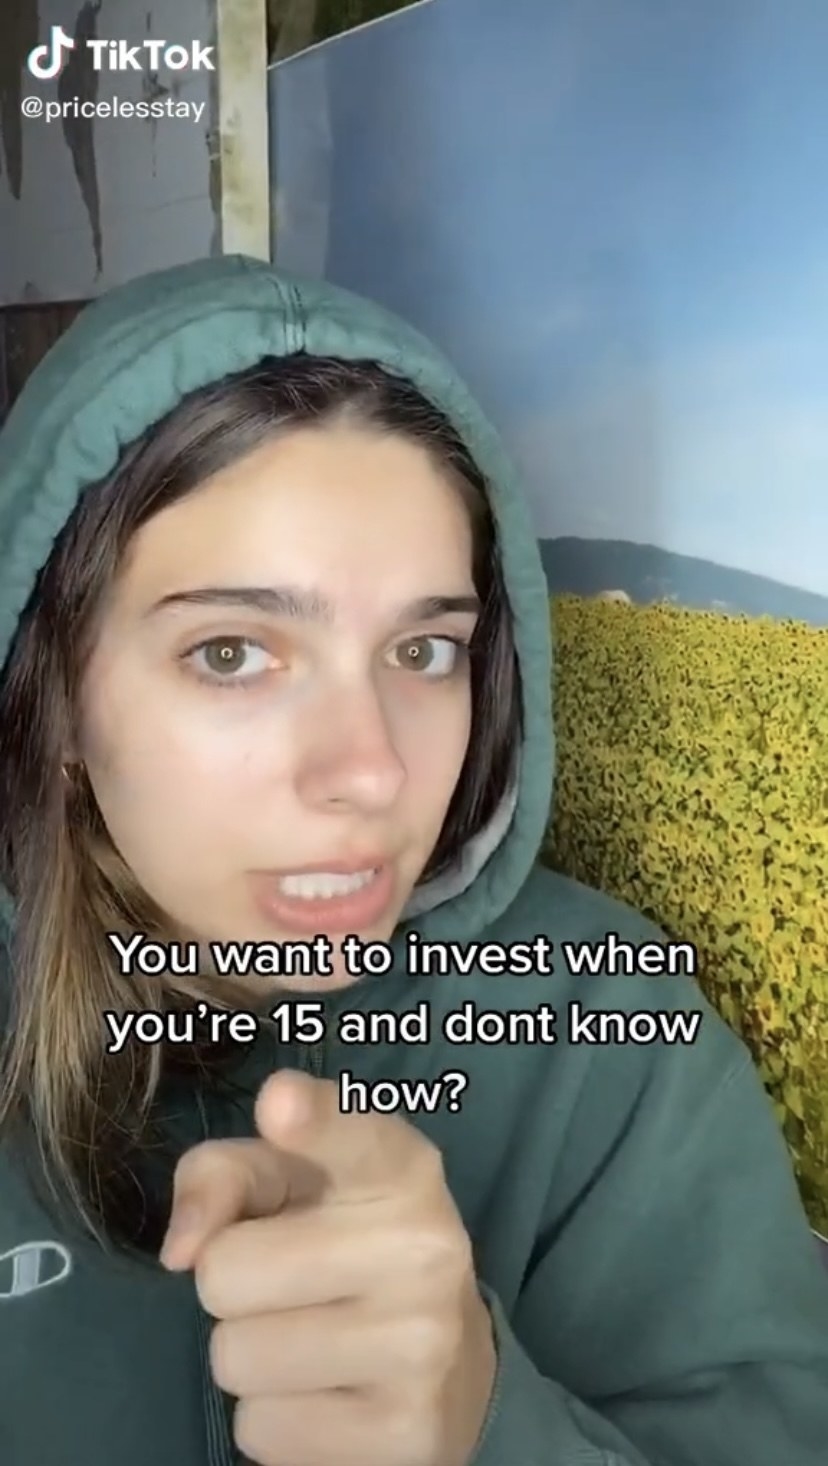 &quot;You want to invest when you&#x27;re 15 and don&#x27;t know how?&quot;